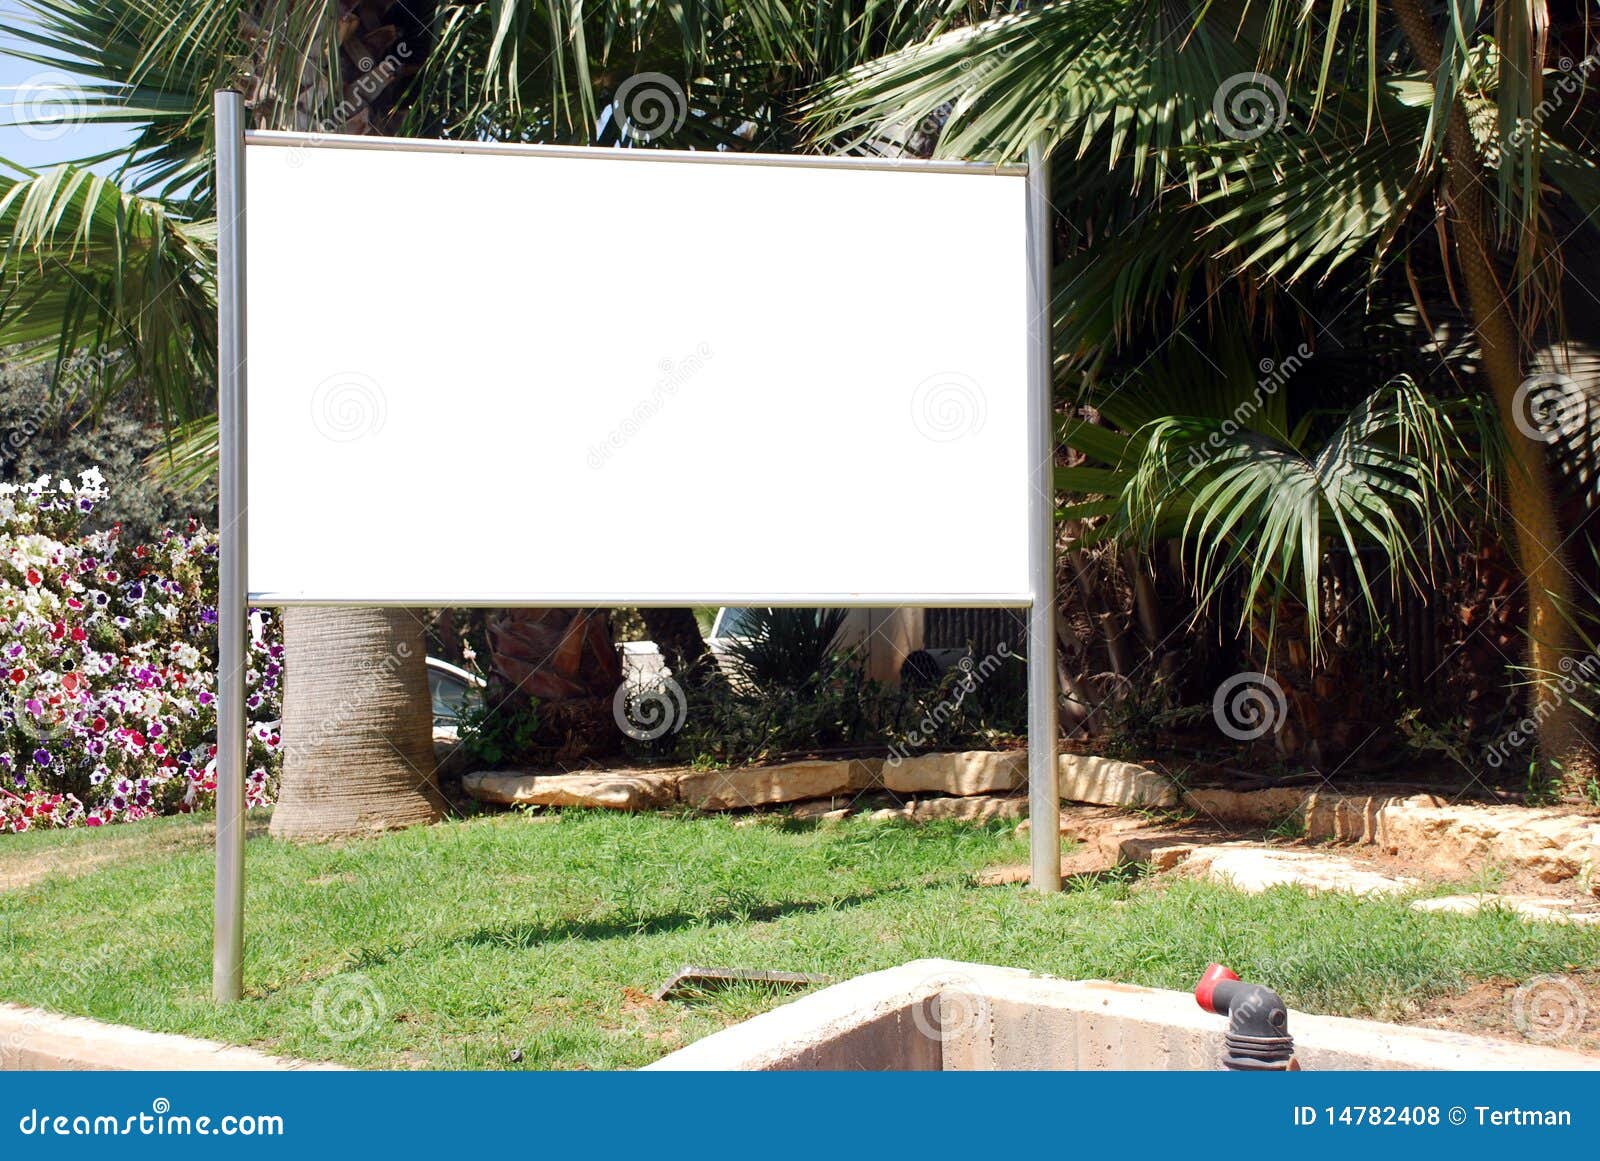 Blank sign stock photo. Image of media, notice, commercial - 14782408